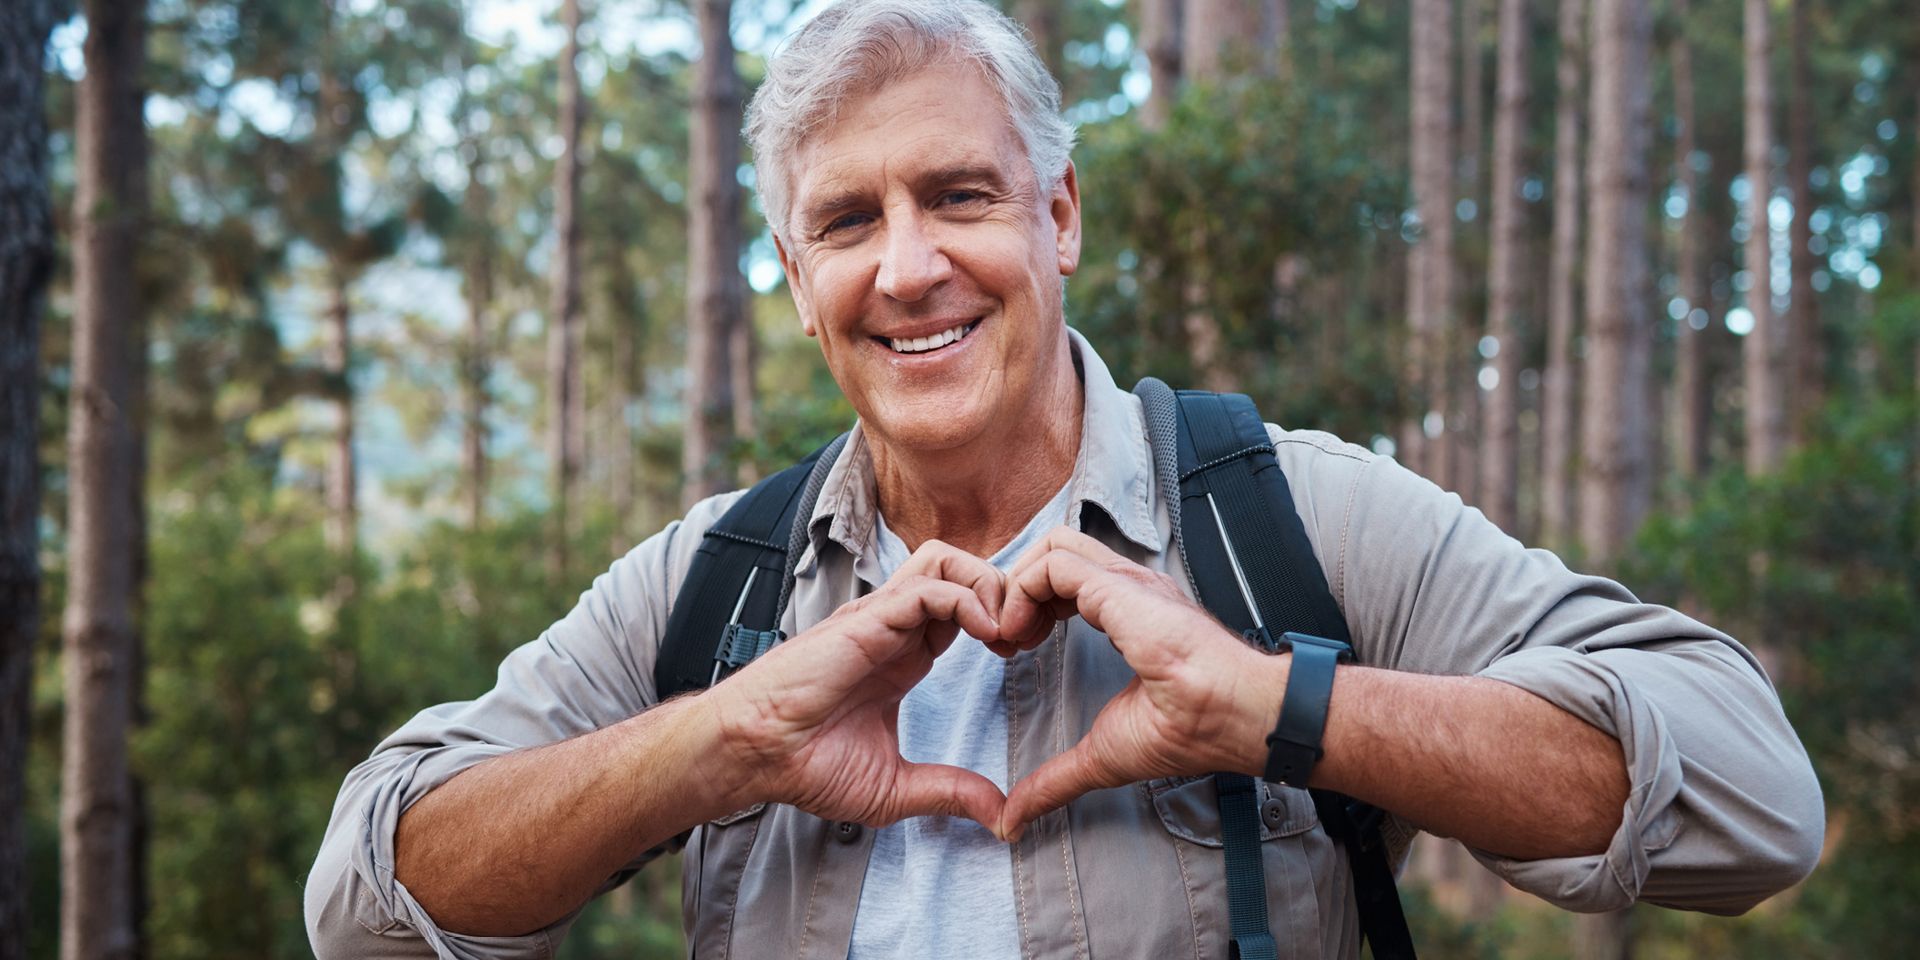 Man hiking in woods making heart sign with his hands.